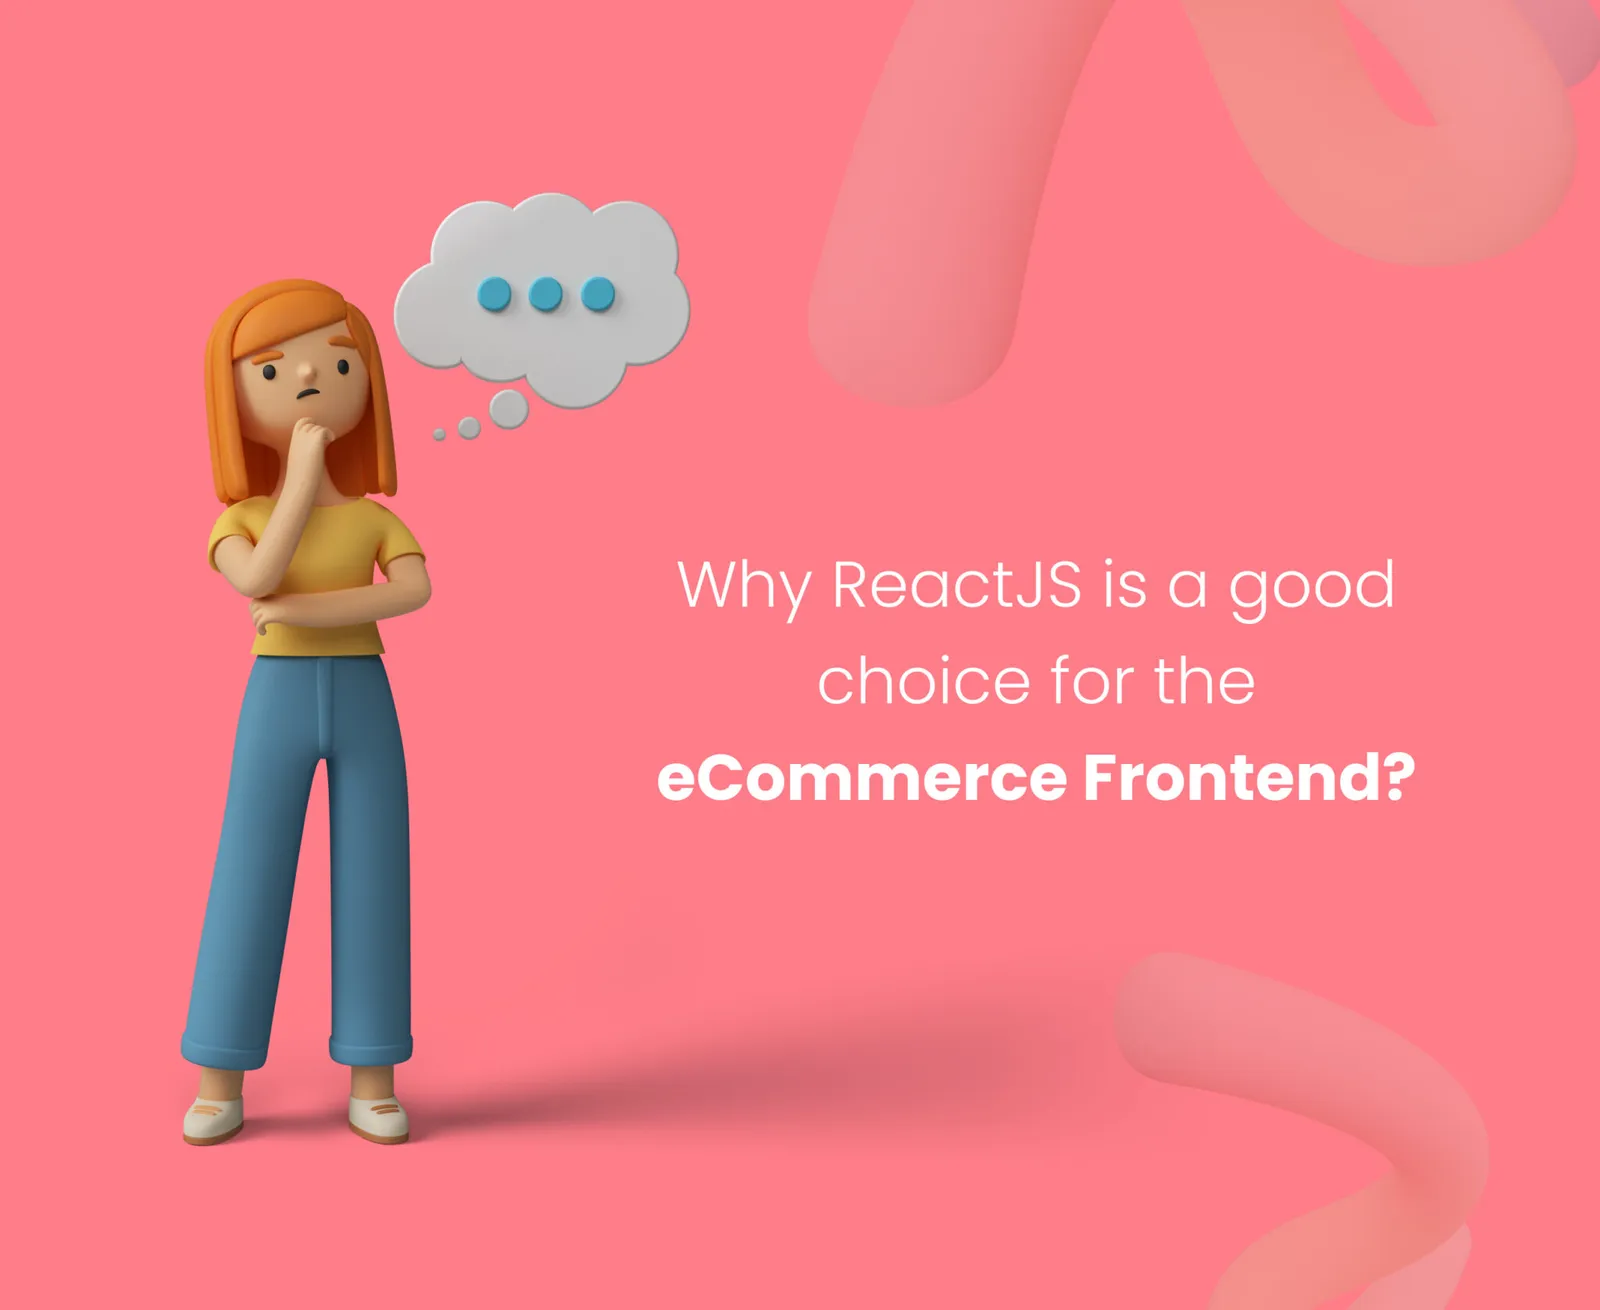 Why Choose ReactJS for the Ecommerce Website?